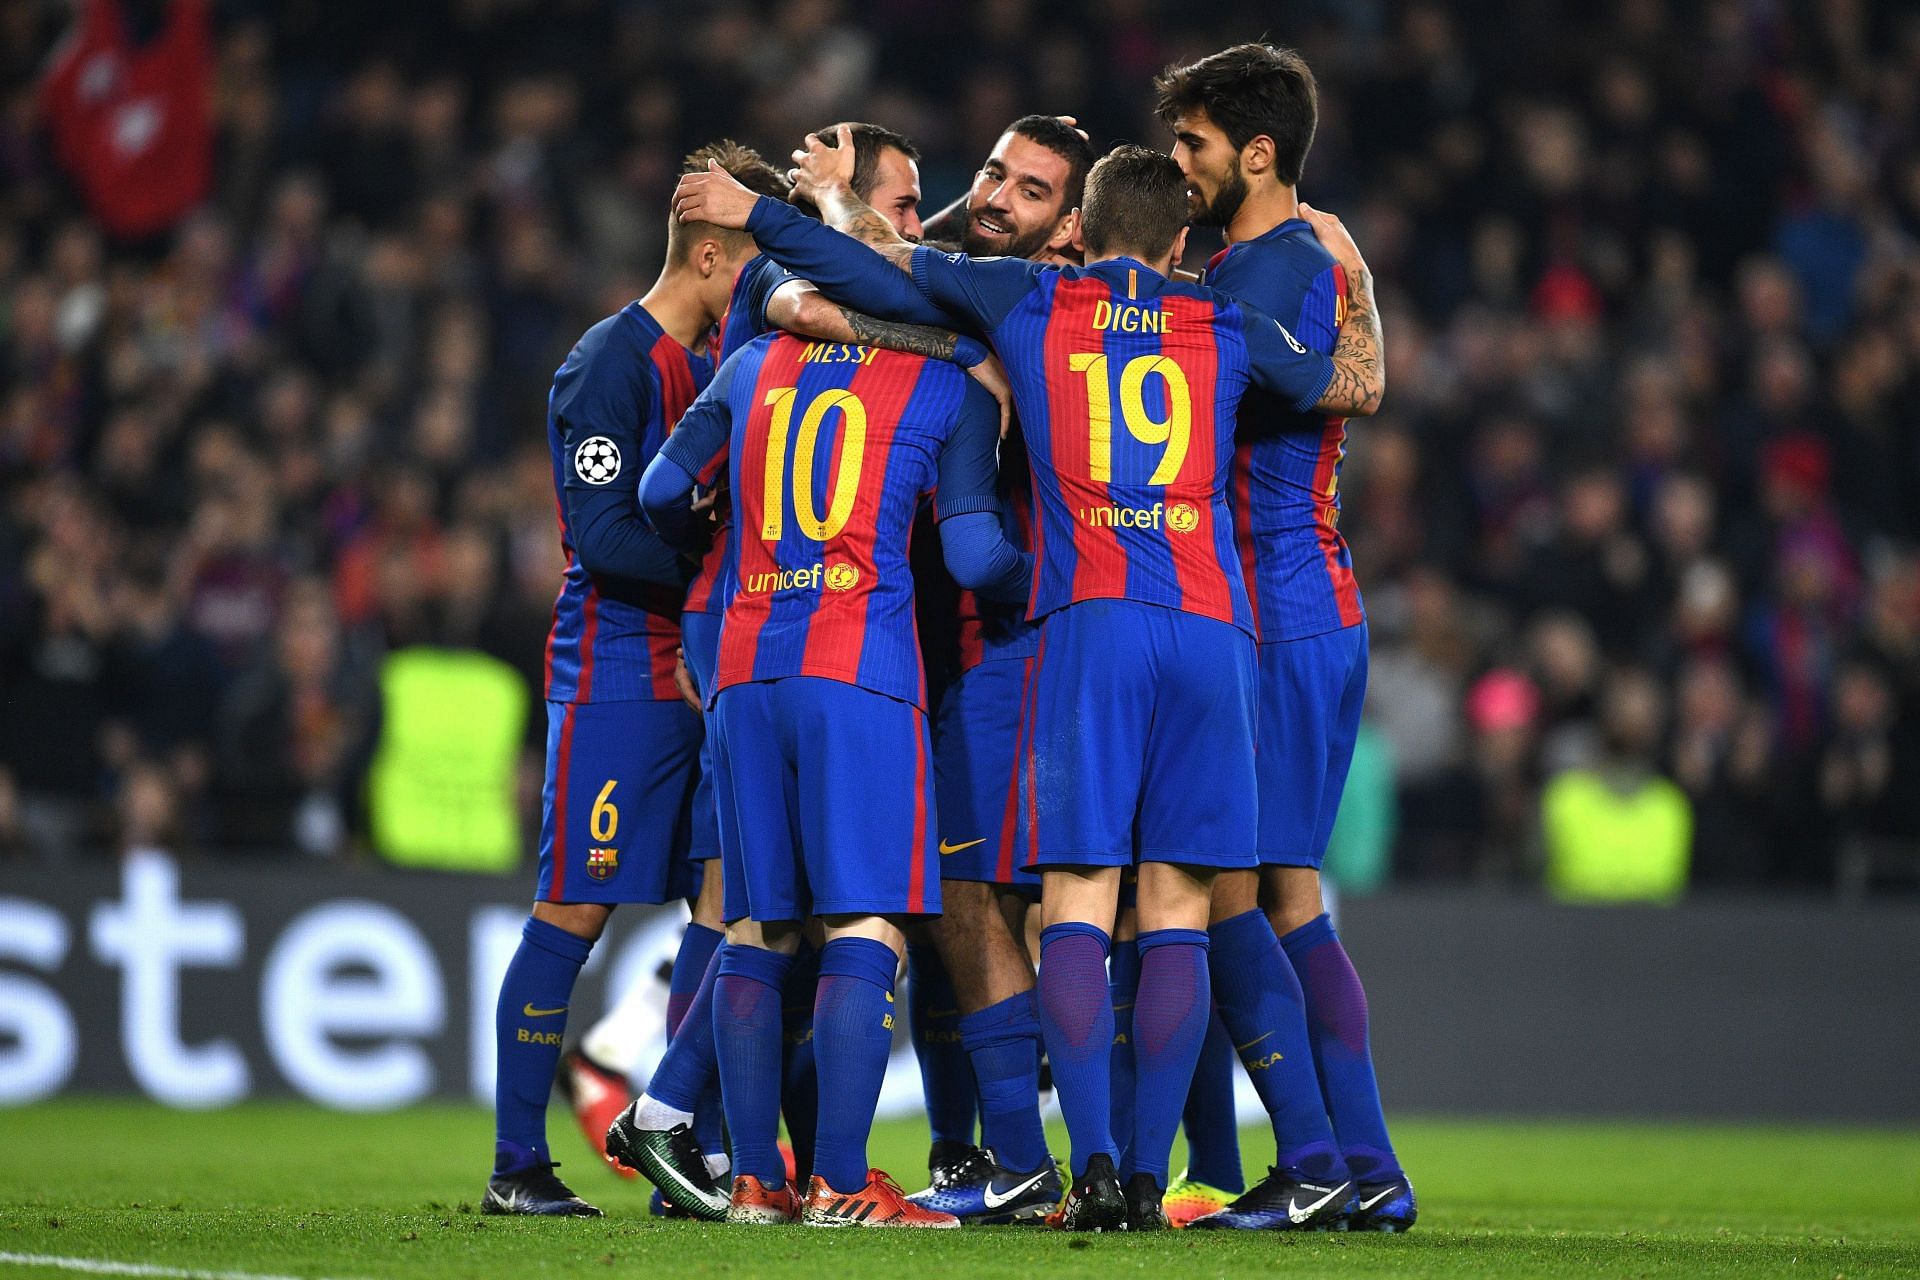 Barcelona dominated the group stages of the Champions League once again between 2016 and 2020.